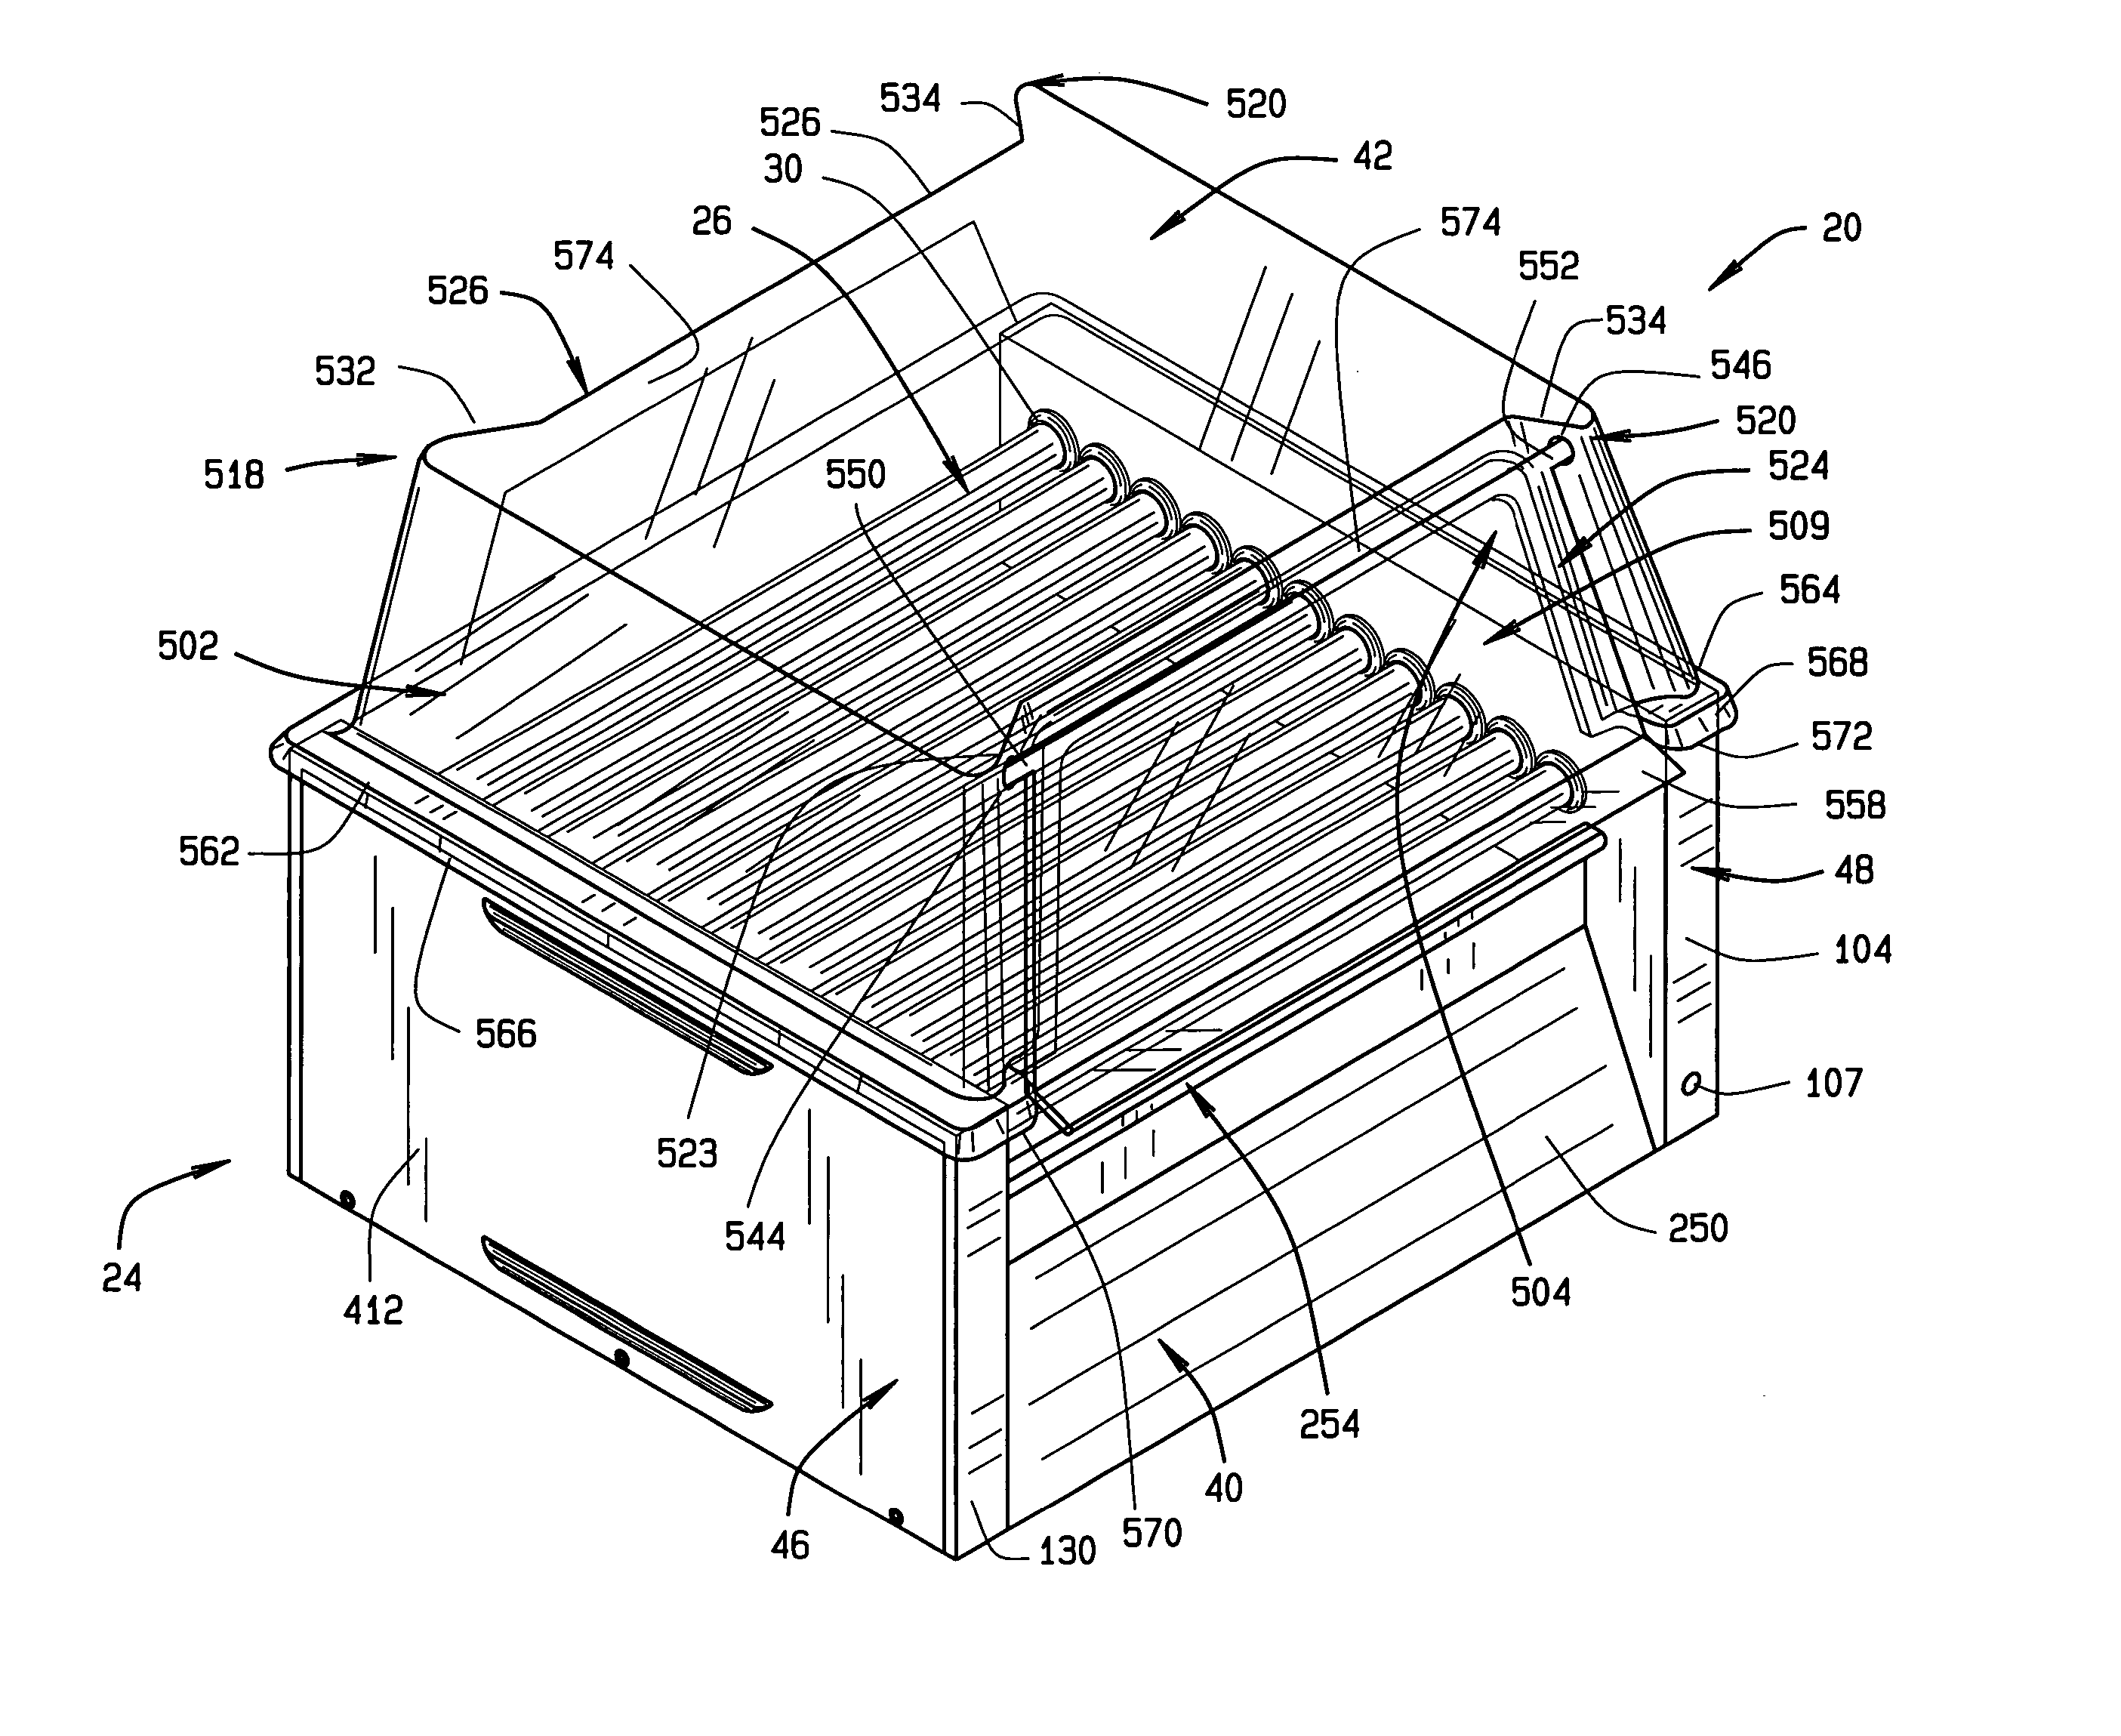 Roller grill assembly for cooking human food